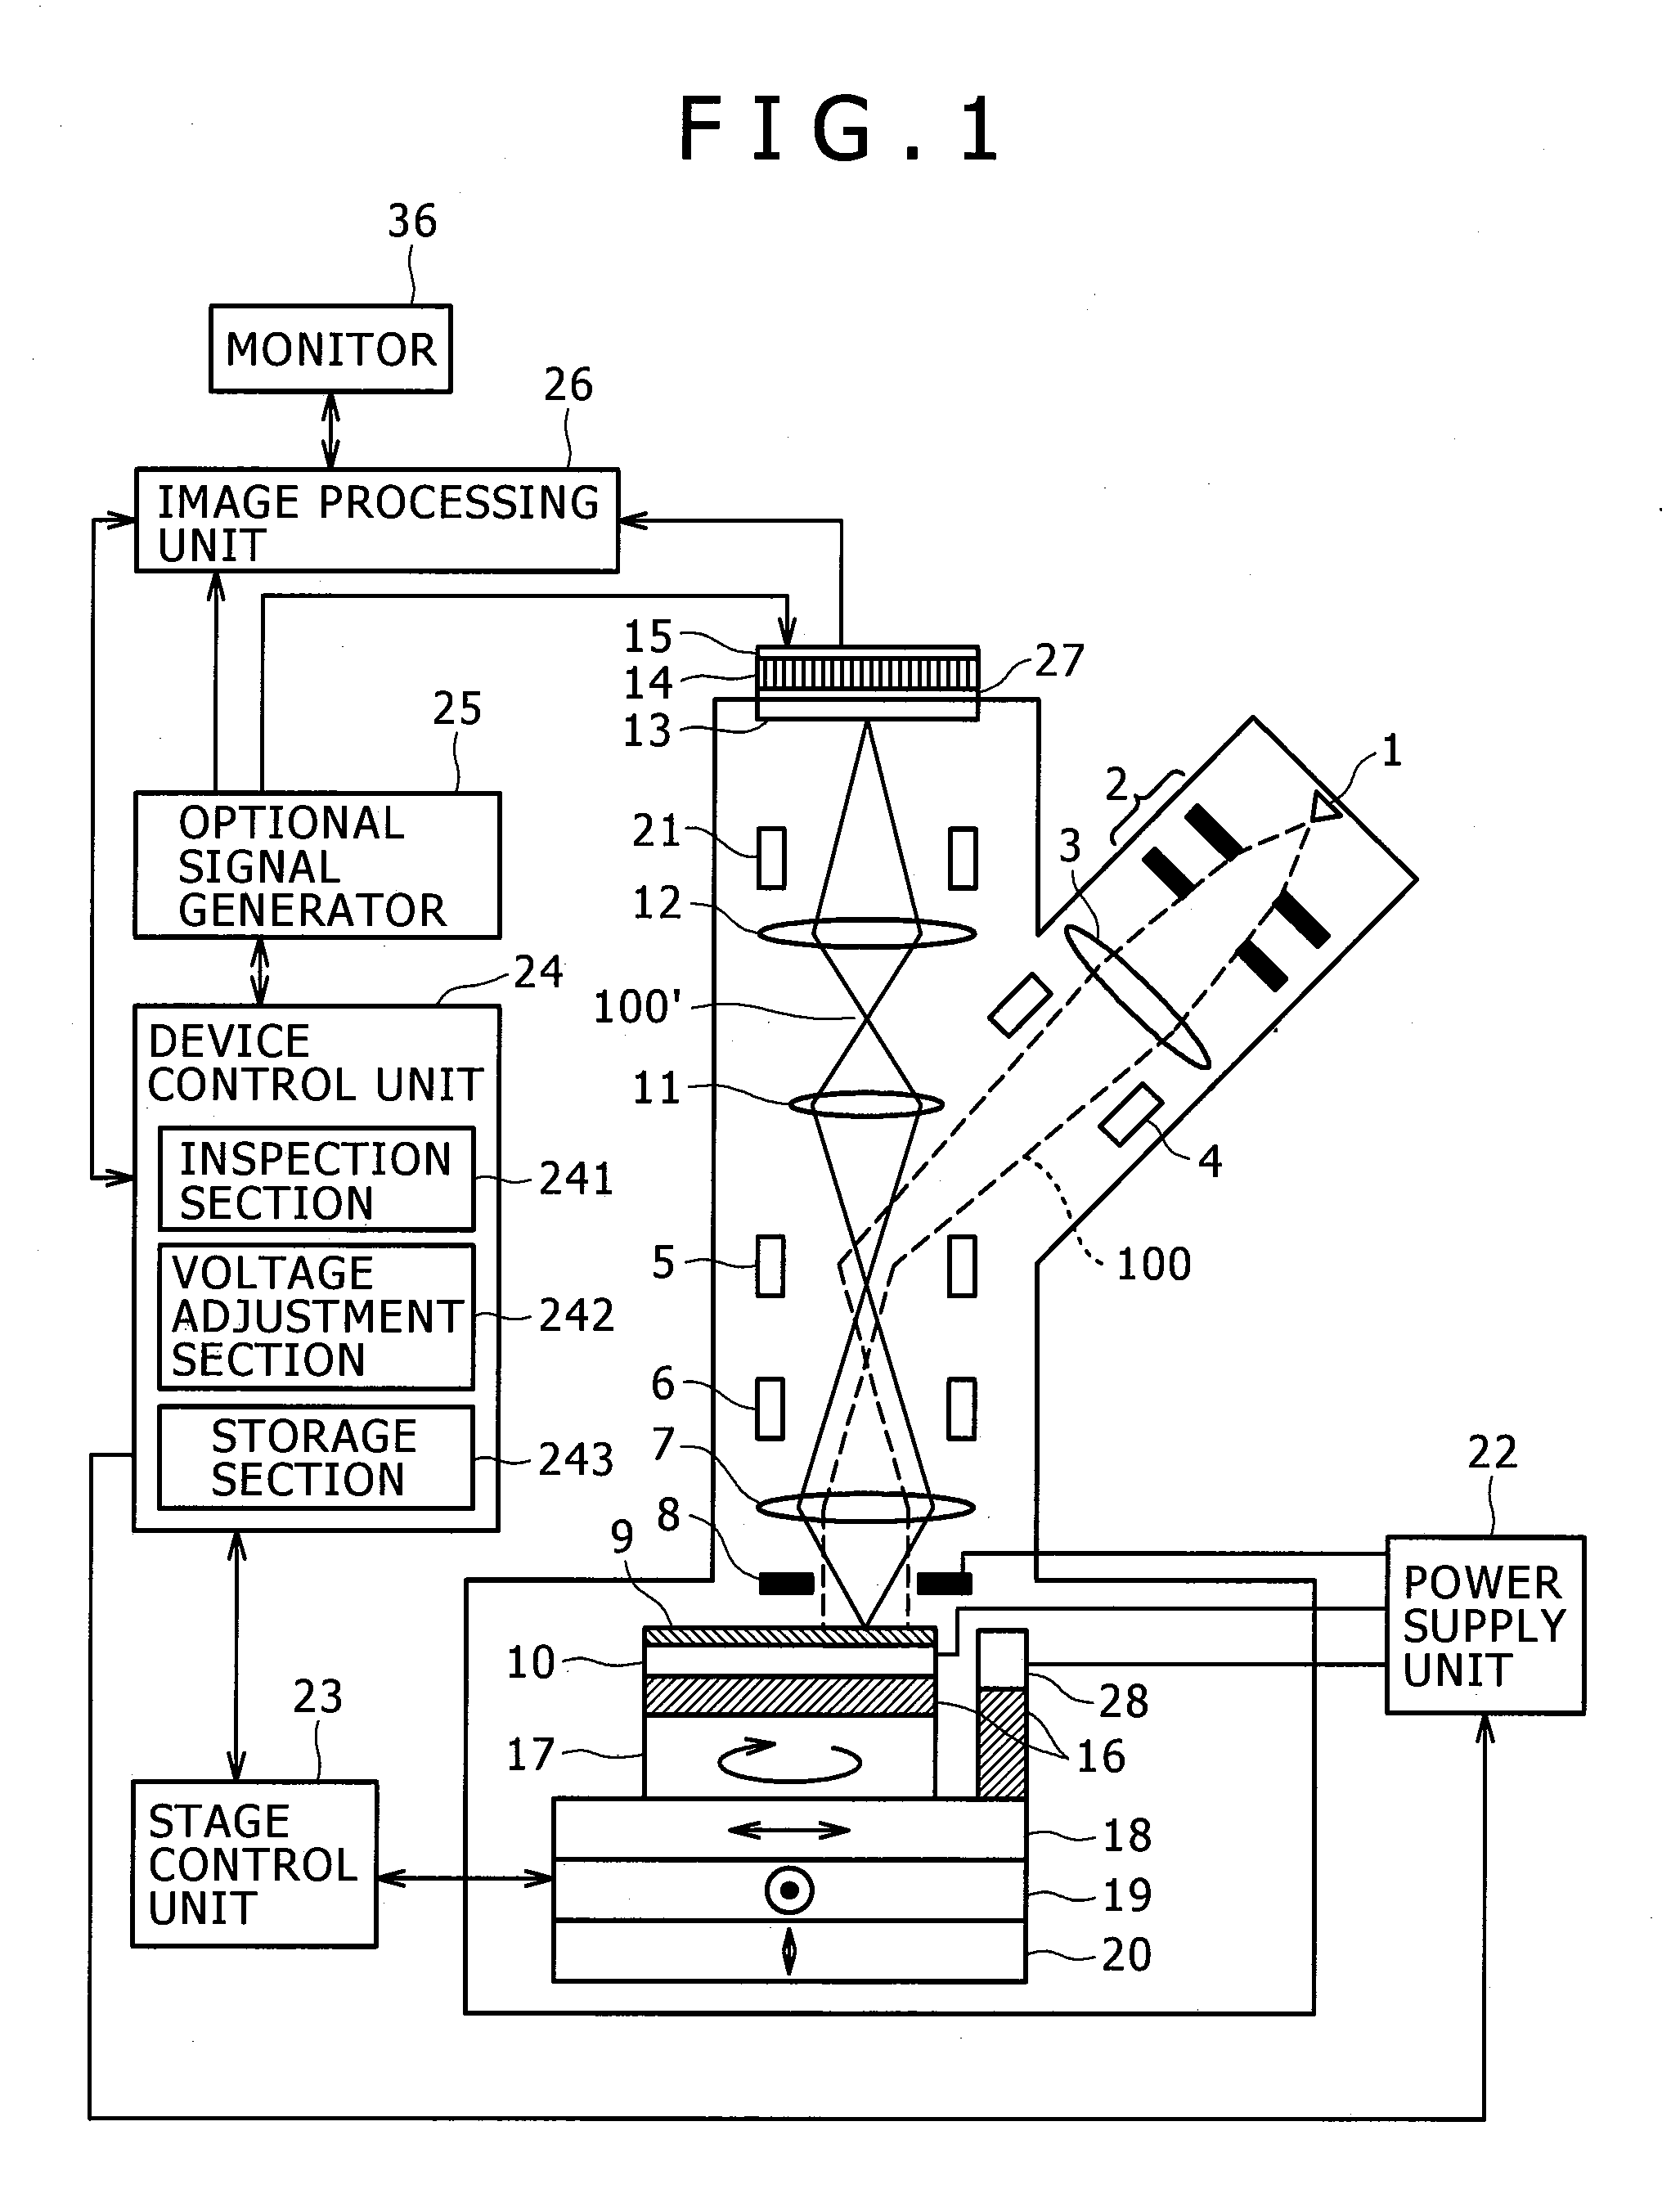 Charged particle beam device